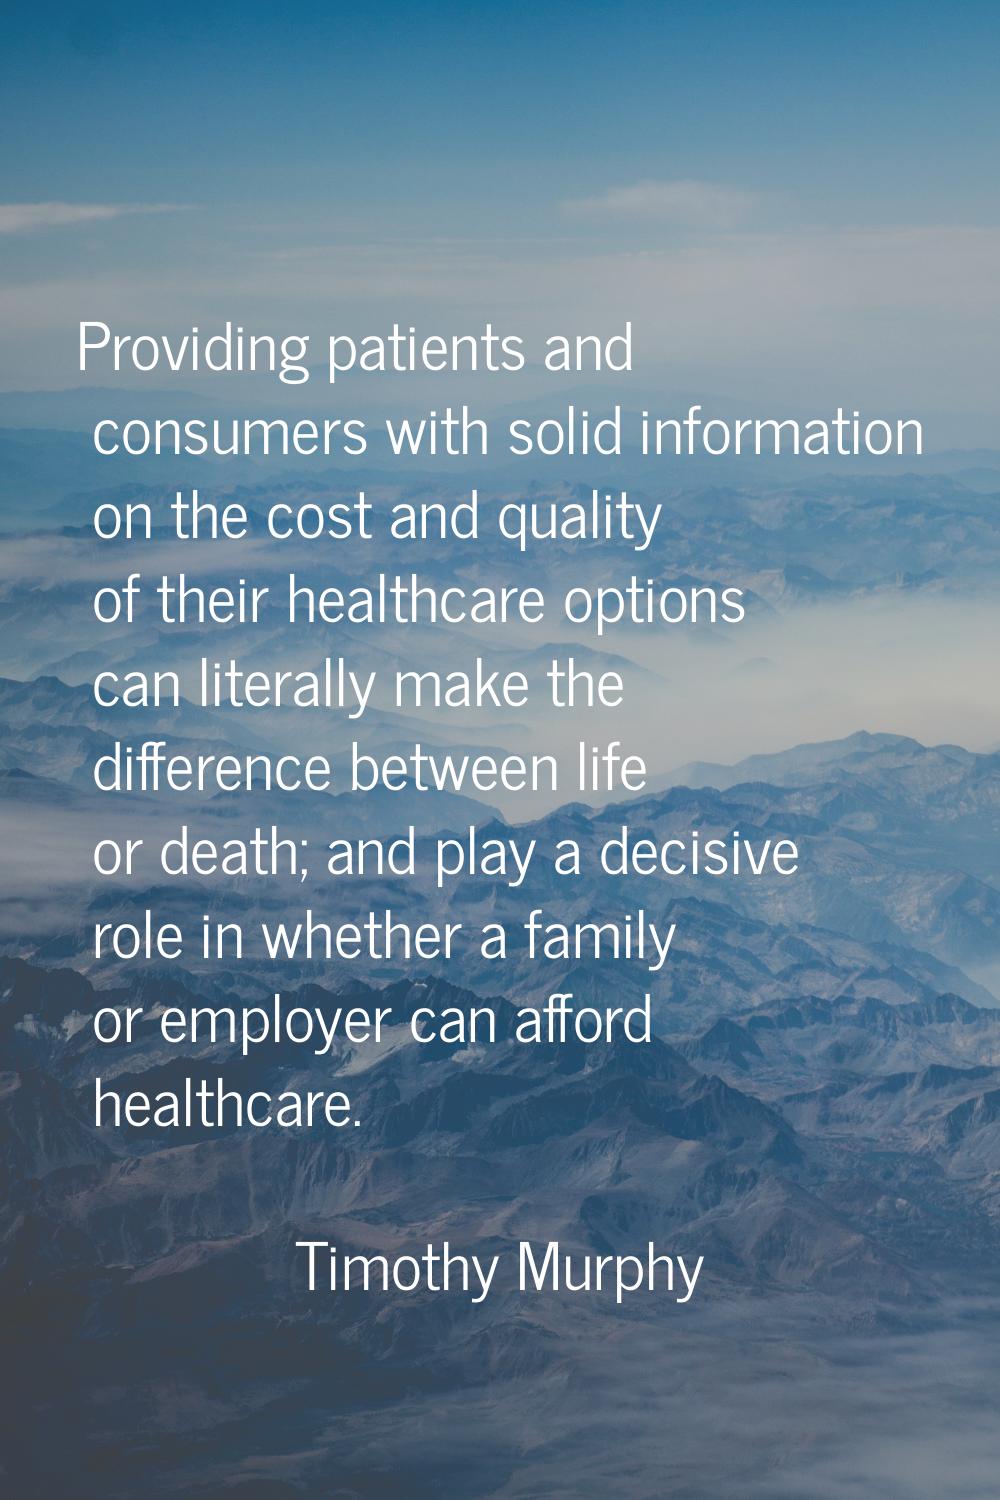 Providing patients and consumers with solid information on the cost and quality of their healthcare